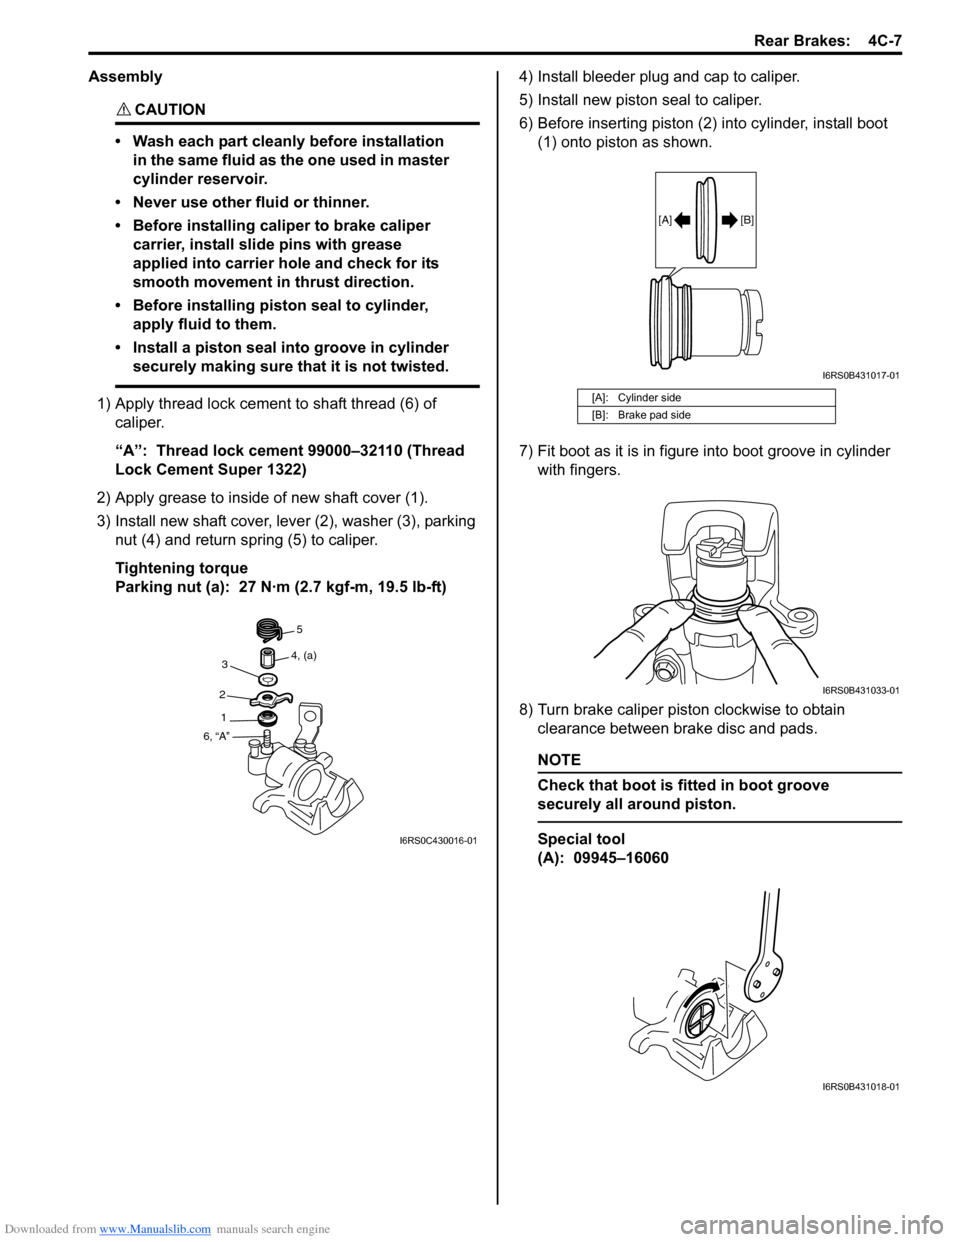 SUZUKI SWIFT 2006 2.G Service Owners Manual Downloaded from www.Manualslib.com manuals search engine Rear Brakes:  4C-7
Assembly
CAUTION! 
• Wash each part cleanly before installation in the same fluid as the one used in master 
cylinder rese